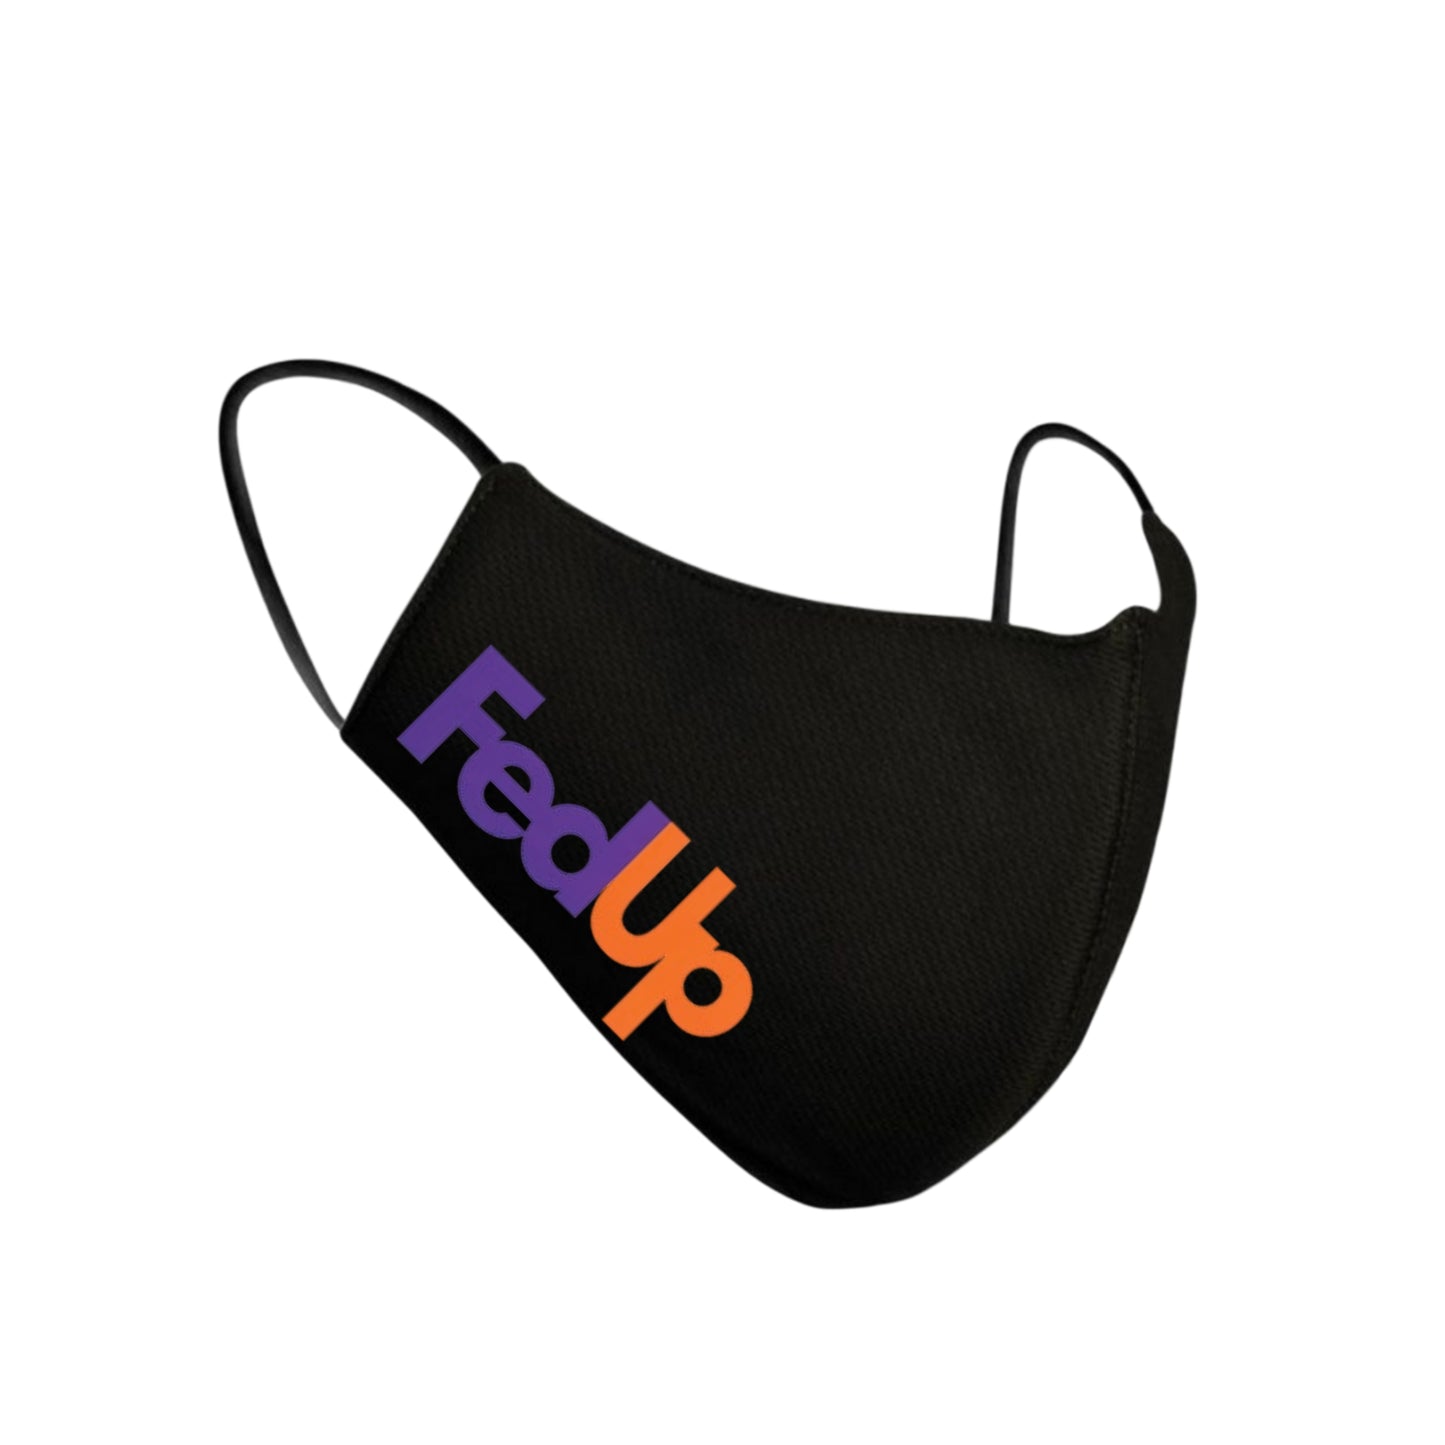 "Fed Up" High-Performance Reusable Face Mask